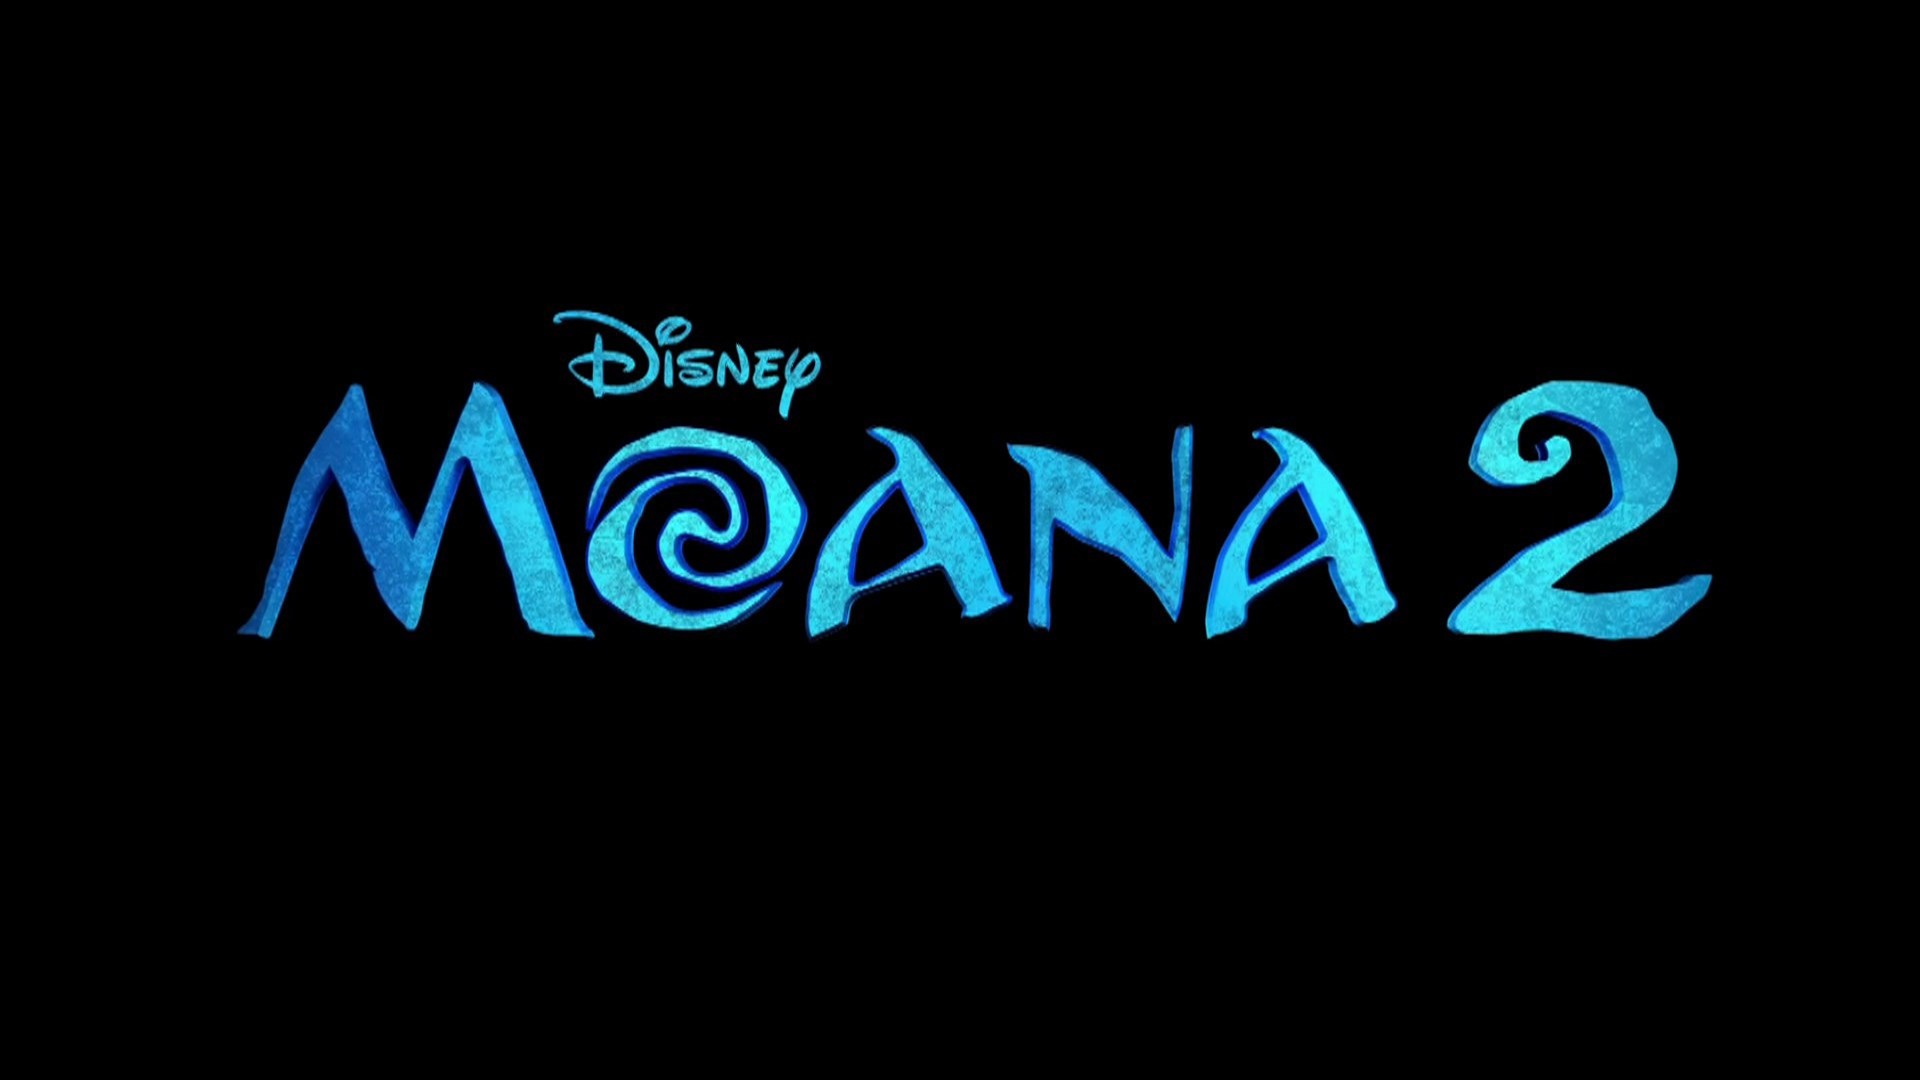 'Moana 2' set to hit theaters in November